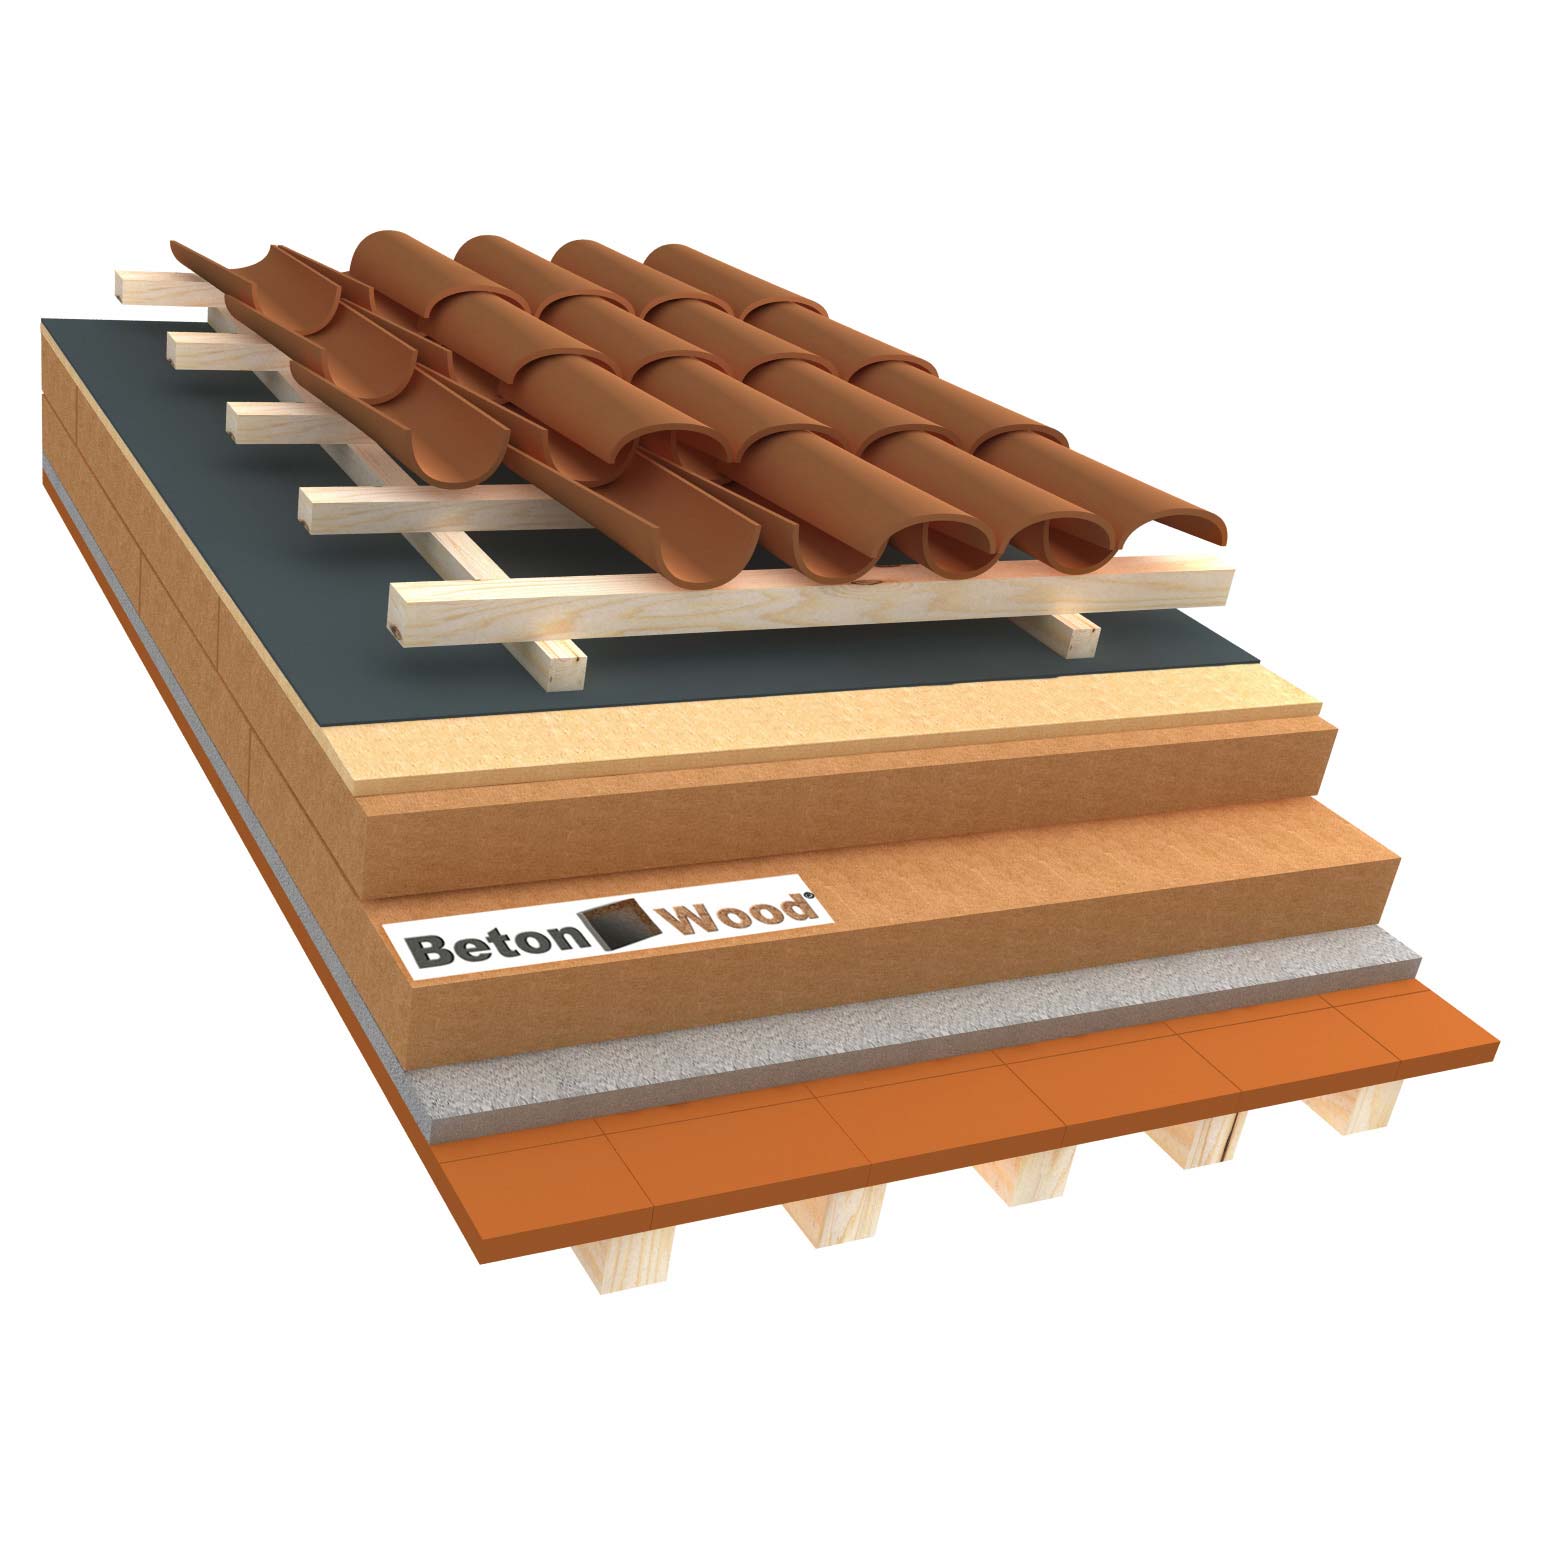 Ventilated roof with fiber wood Isorel and Therm SD on terracotta tiles